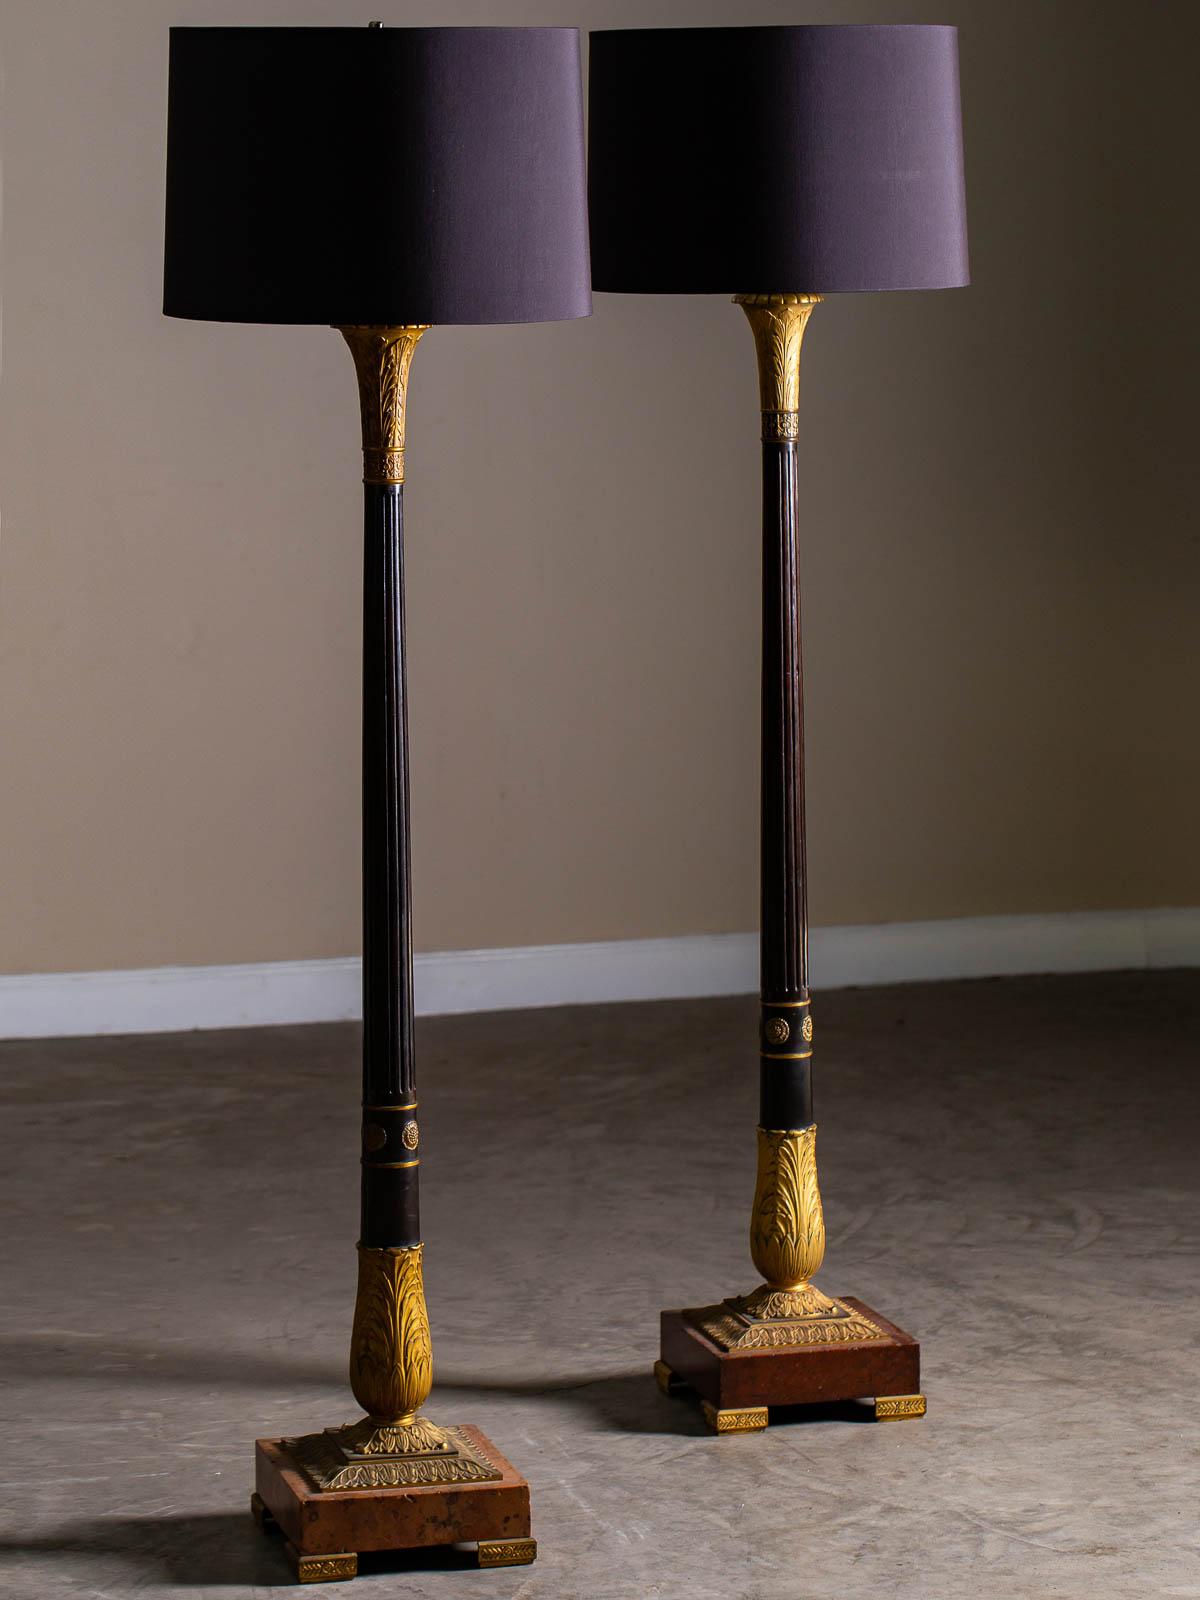 2 Vintage French Neoclassical Bronze Gilt Bronze Column Floor Lamps, circa 1910 For Sale 11